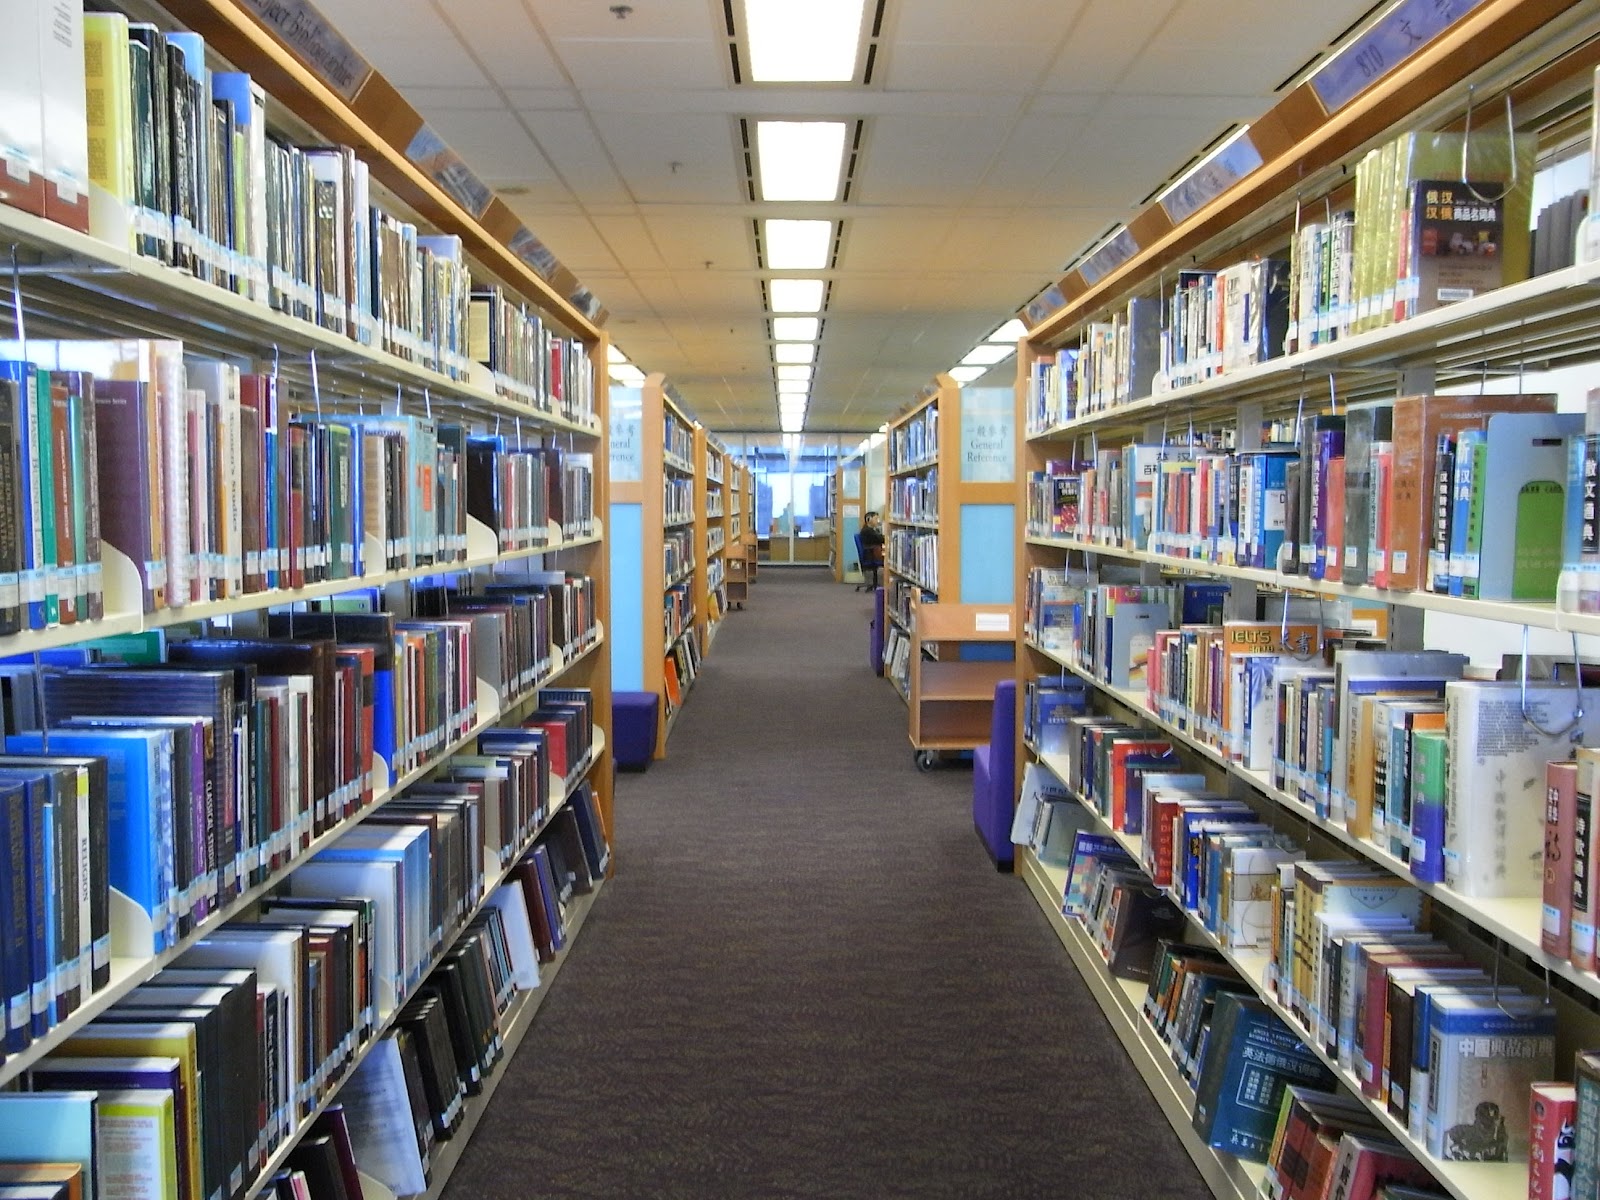 HKCL_Central_Library_interior_bookcases.JPG